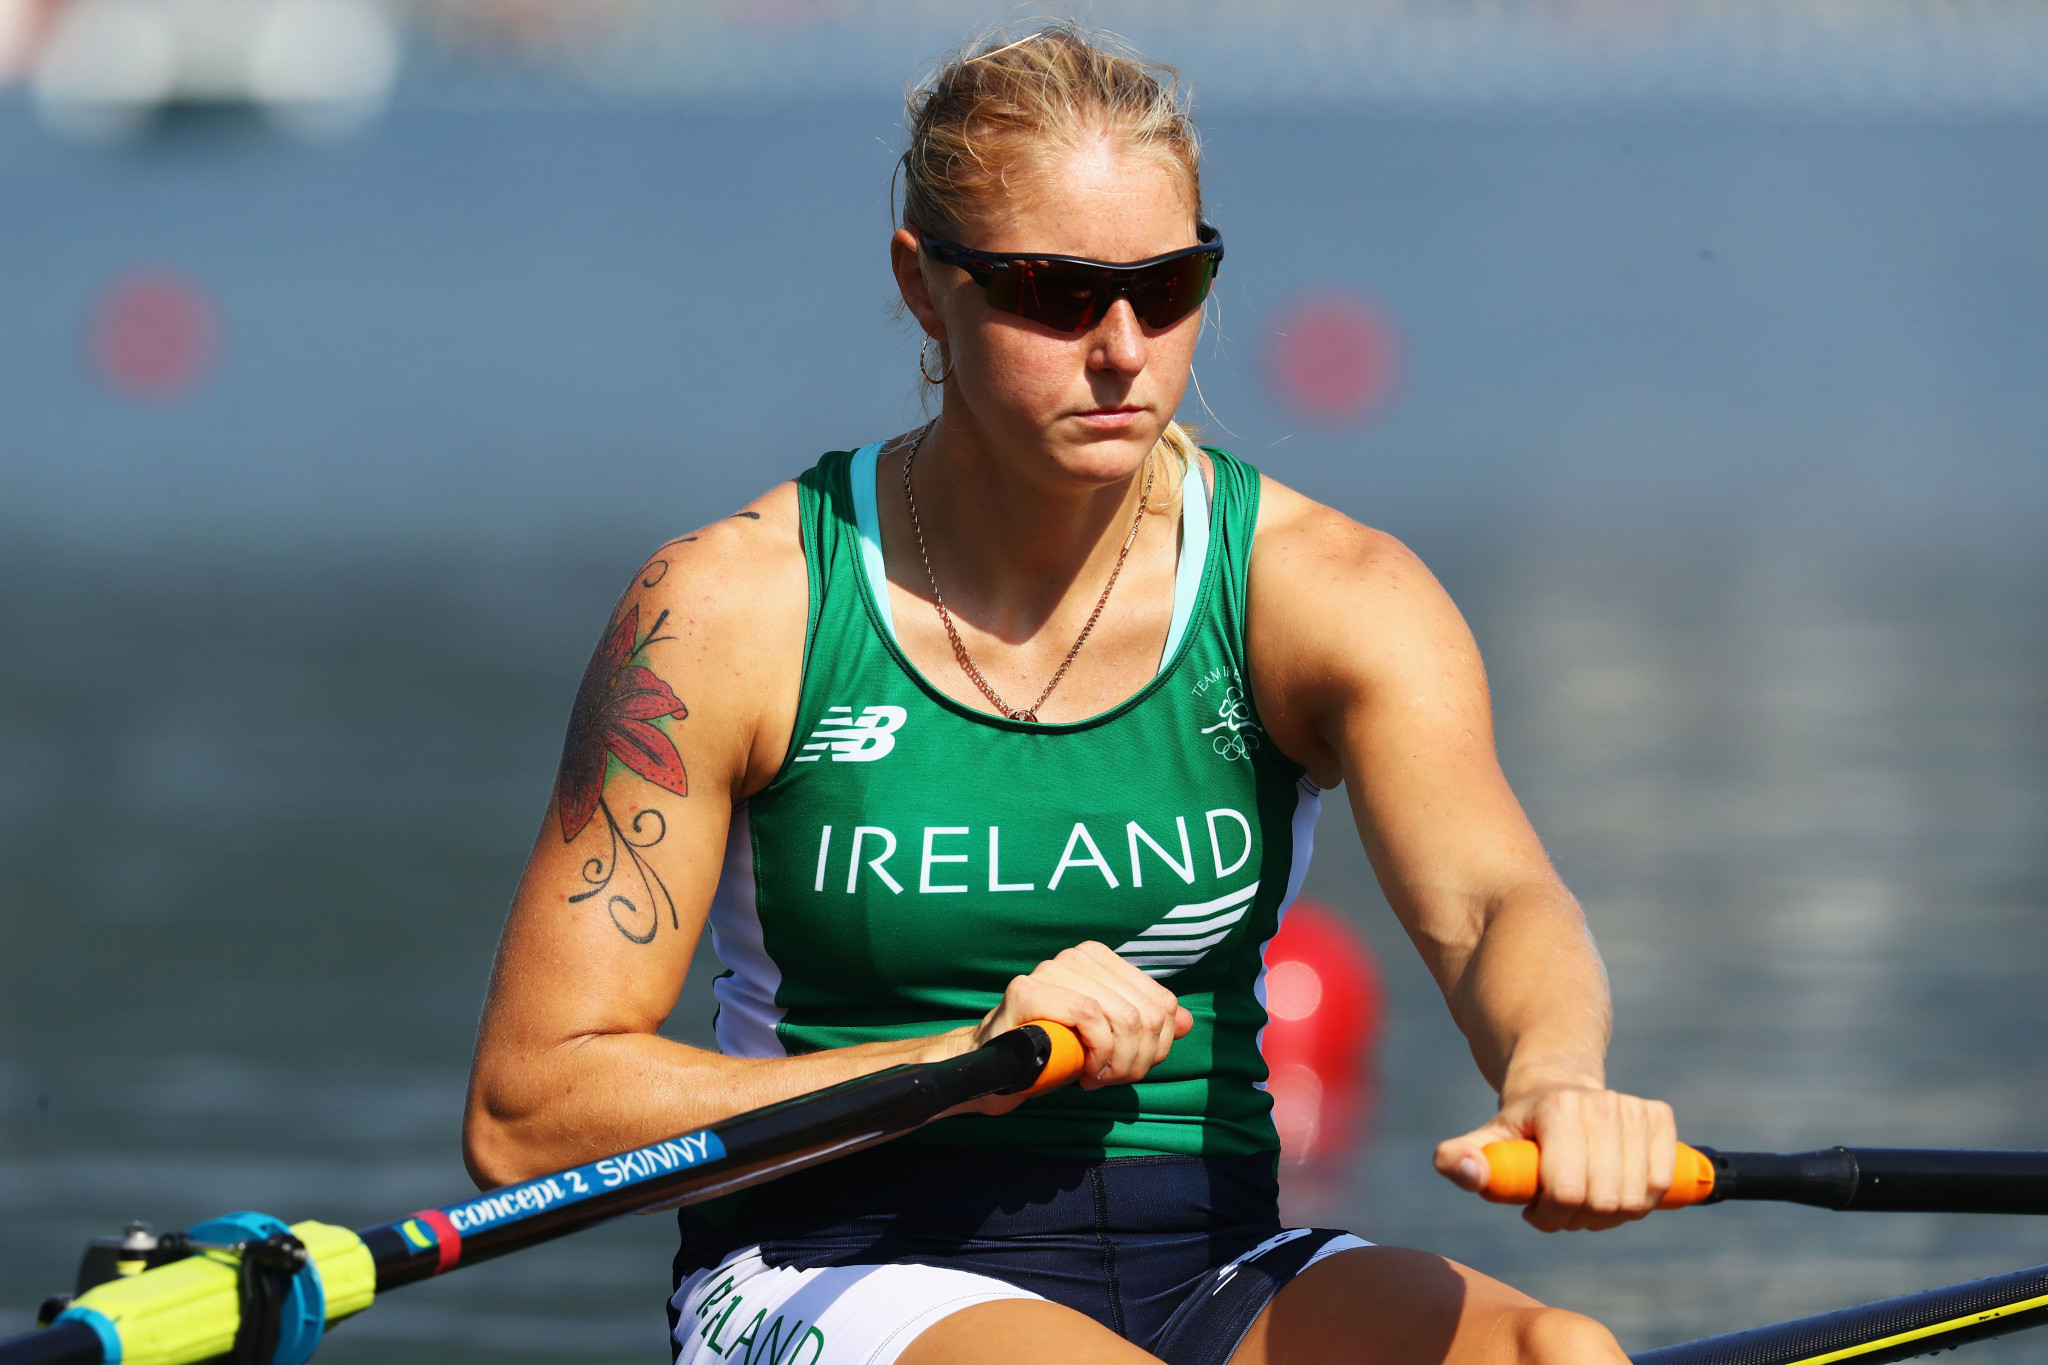 World champion Sanita Puspure of Ireland was dominant in her women's single sculls heat at the European Rowing Championships ©Getty Images